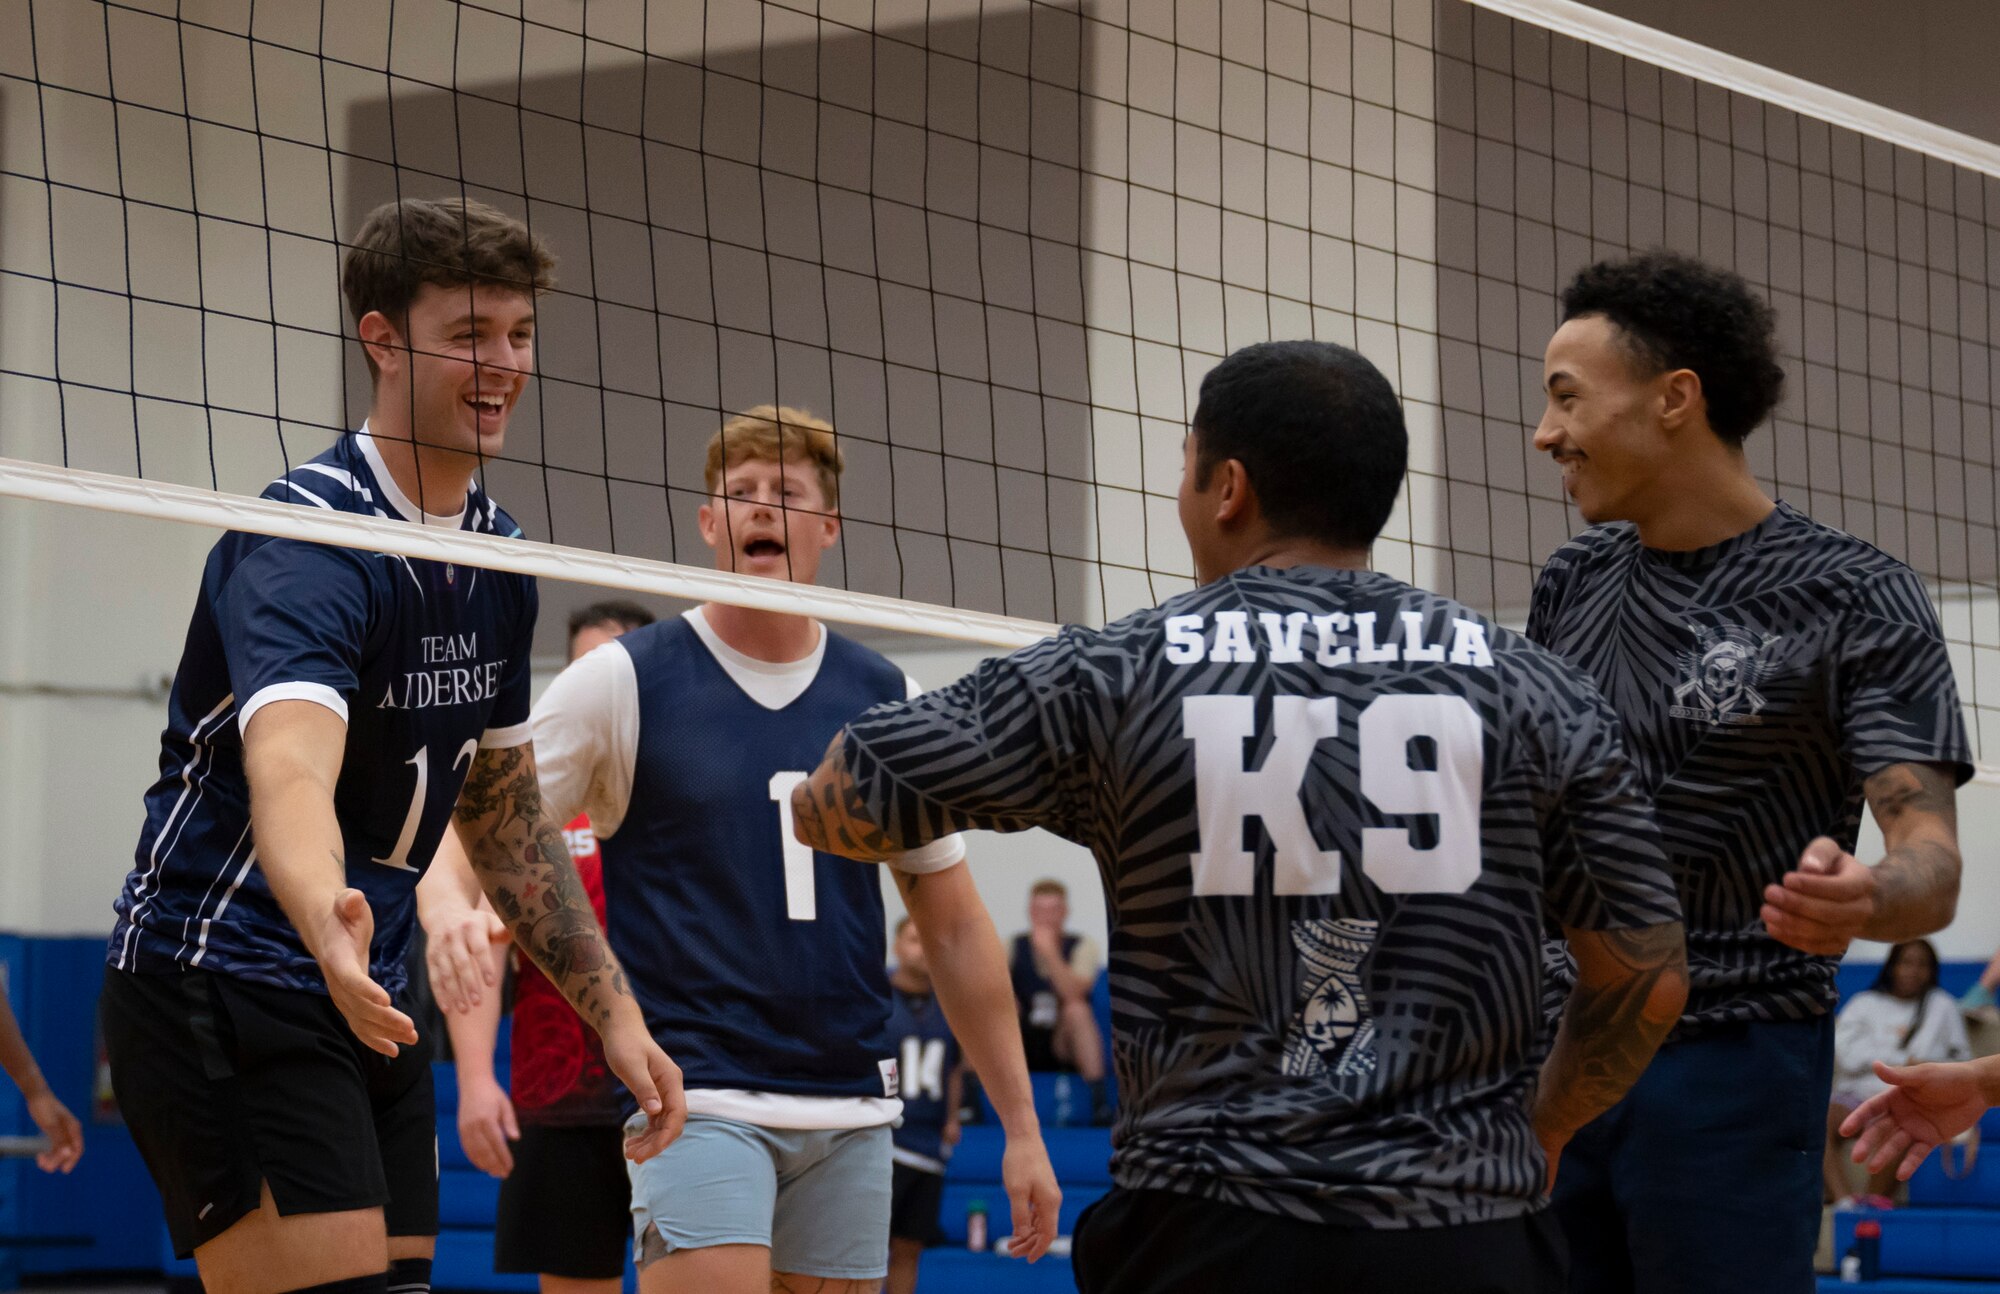 Members of the Civil Engineer Squadron and Security Forces Squadron intramural volleyball teams congratulate each other during the championship game on Andersen Air Force Base, Guam, Oct. 26, 2023.  Andersen’s intramural volleyball league ended in a climactic final game between the Security Forces Squadron and CES. The game ended with SFS being named the champions. (U.S. Air Force photo by Airman 1st Class Spencer Perkins)